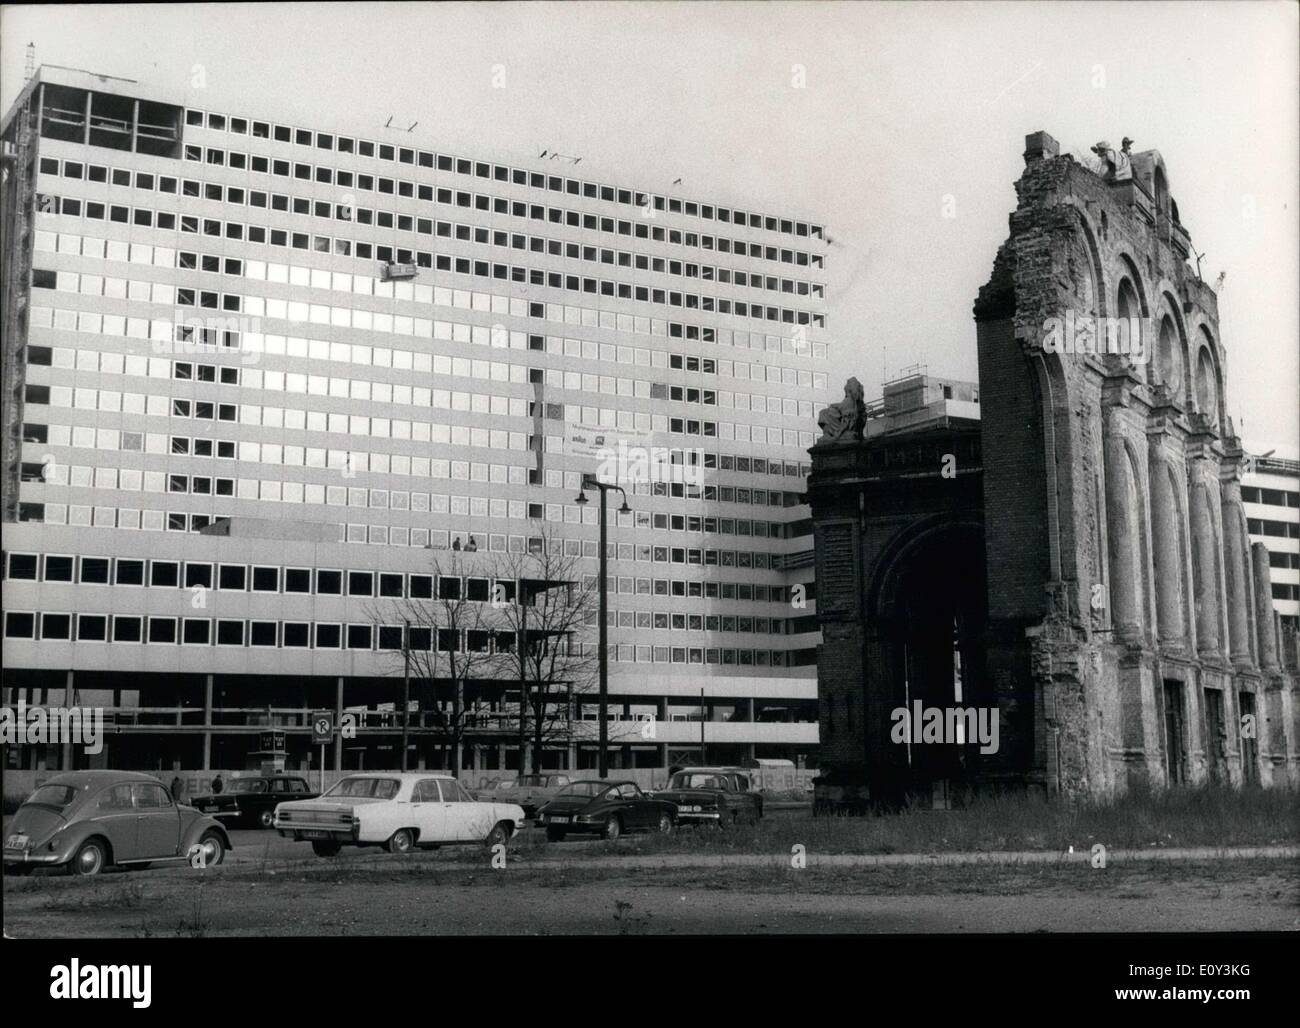 Sep. 30, 1968 - Pictured here is an interesting mix of old and new. Immediately next to the bombed ruins of the Berlin Anhalterbahnhof is a modern, gigantic housing complex. The contrast between old and new is quite striking. Stock Photo